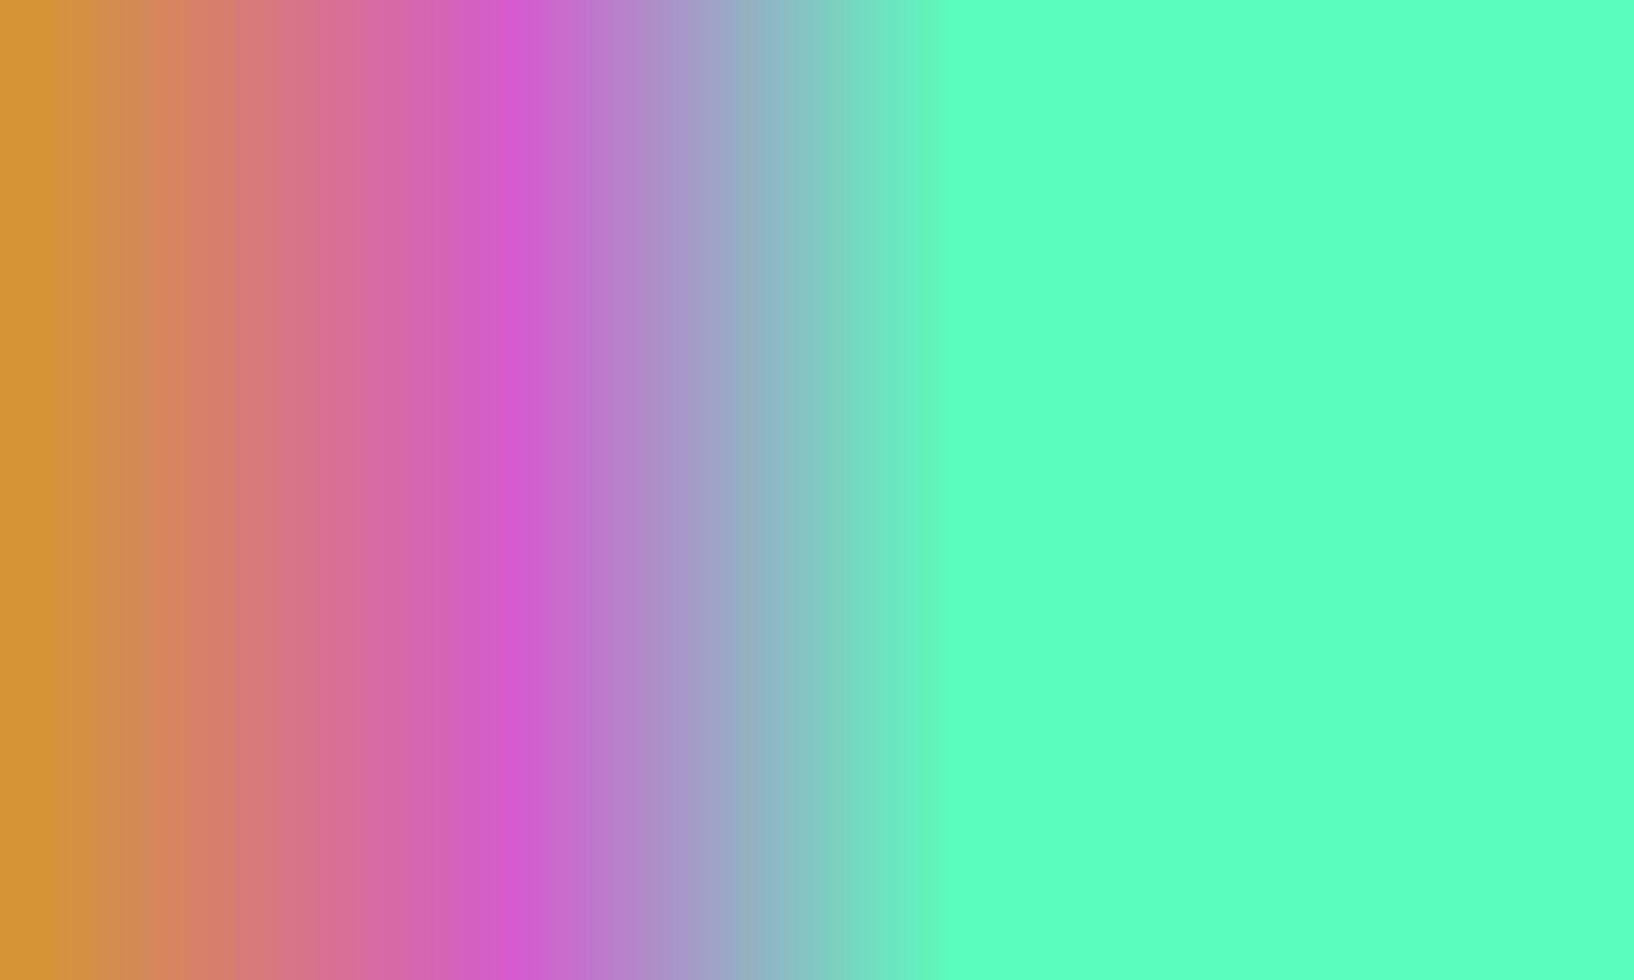 Design simple green,red and pink gradient color illustration background photo